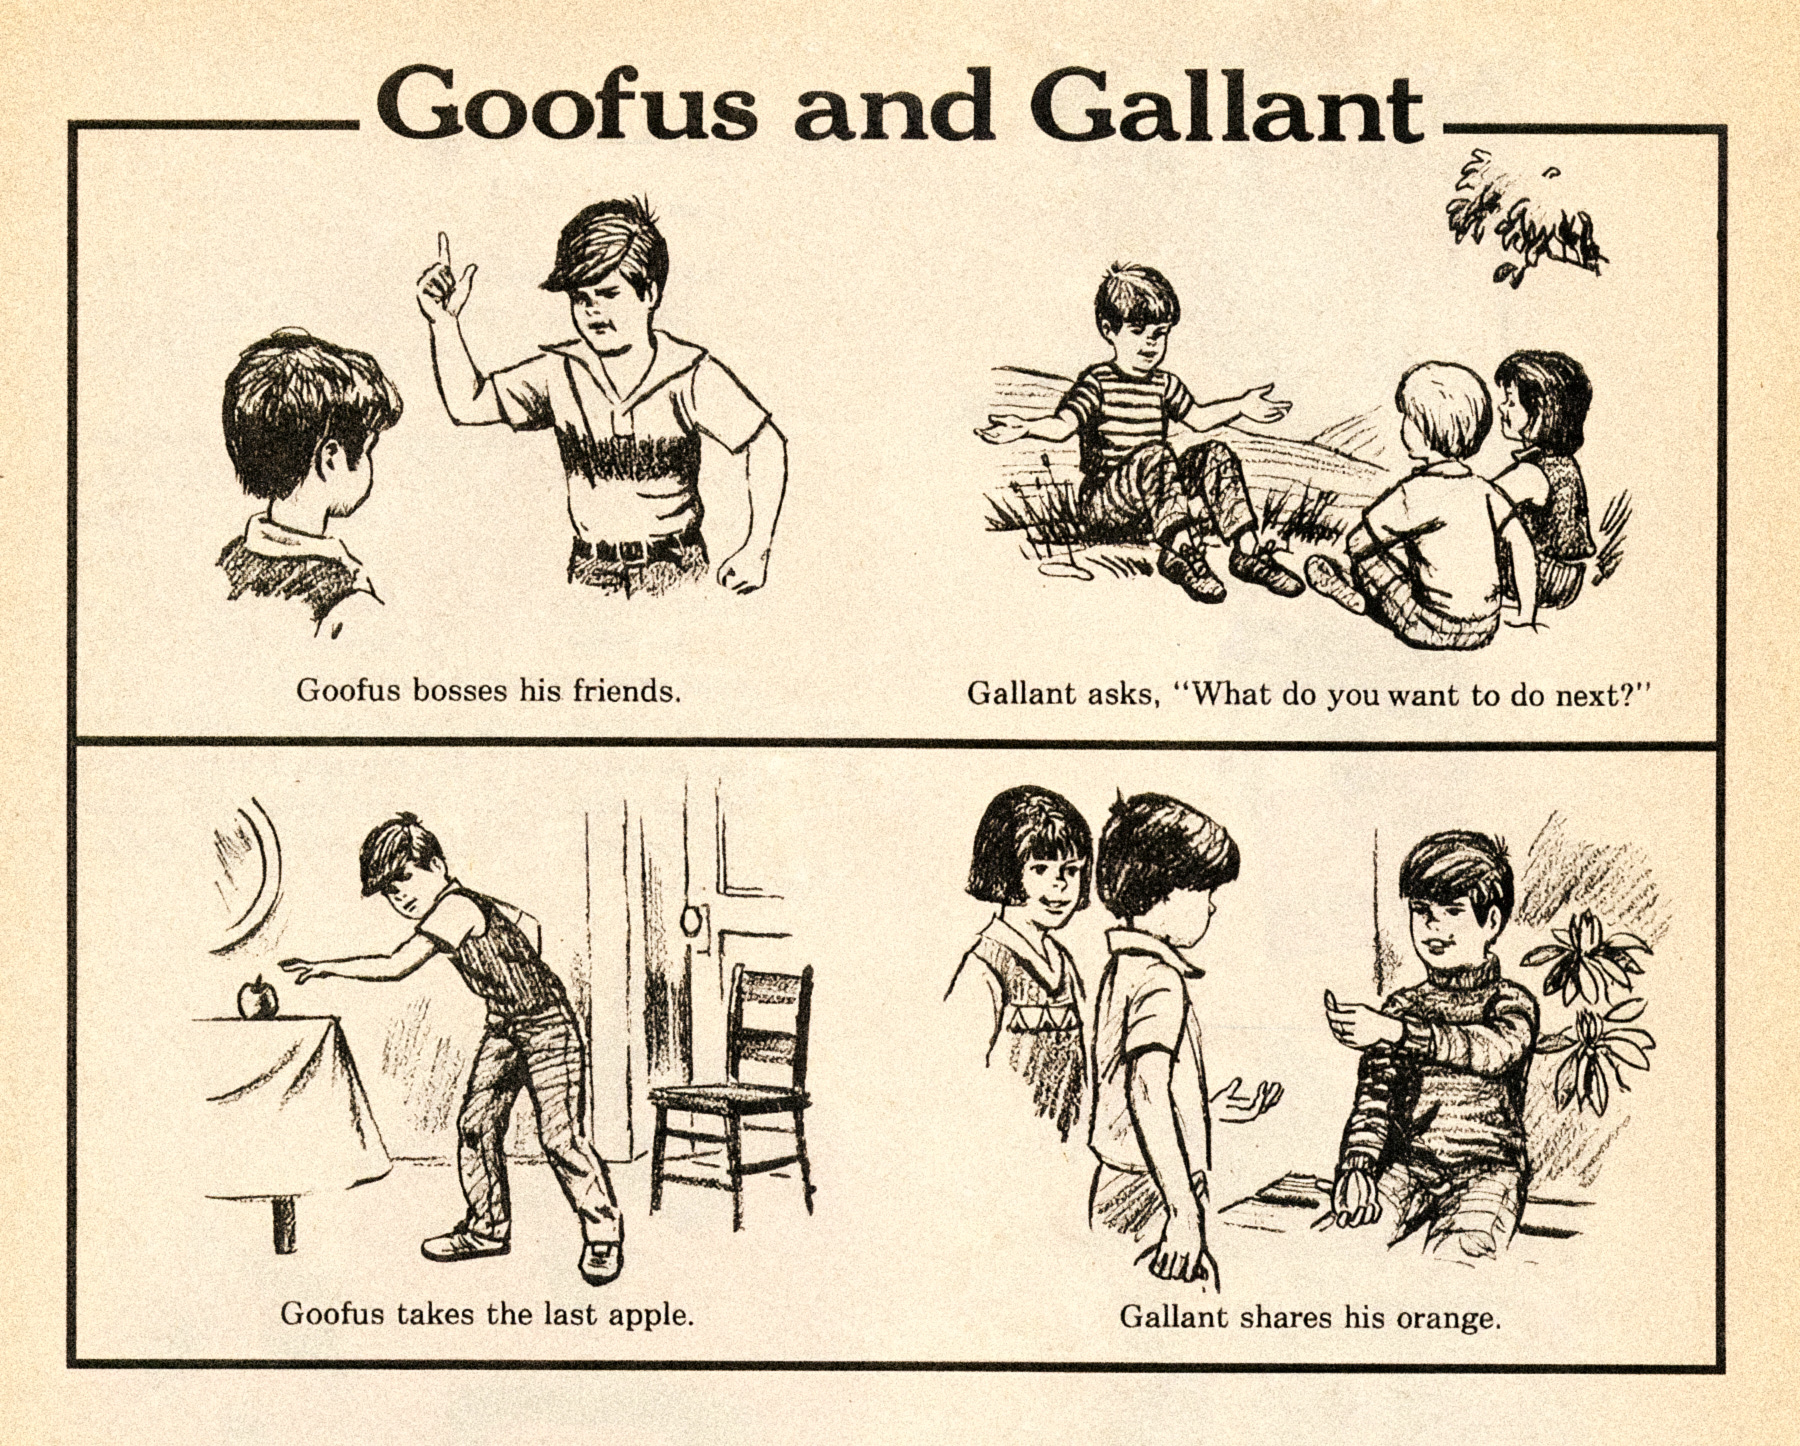 An image of two "Goofus and Gallant" comics drawn in the classic style. One's caption reads: "Goofus bosses his friends. Gallant asks, 'What do you want to do next?'" The next caption reads: "Goofus takes the last apple. Gallant shares his orange.